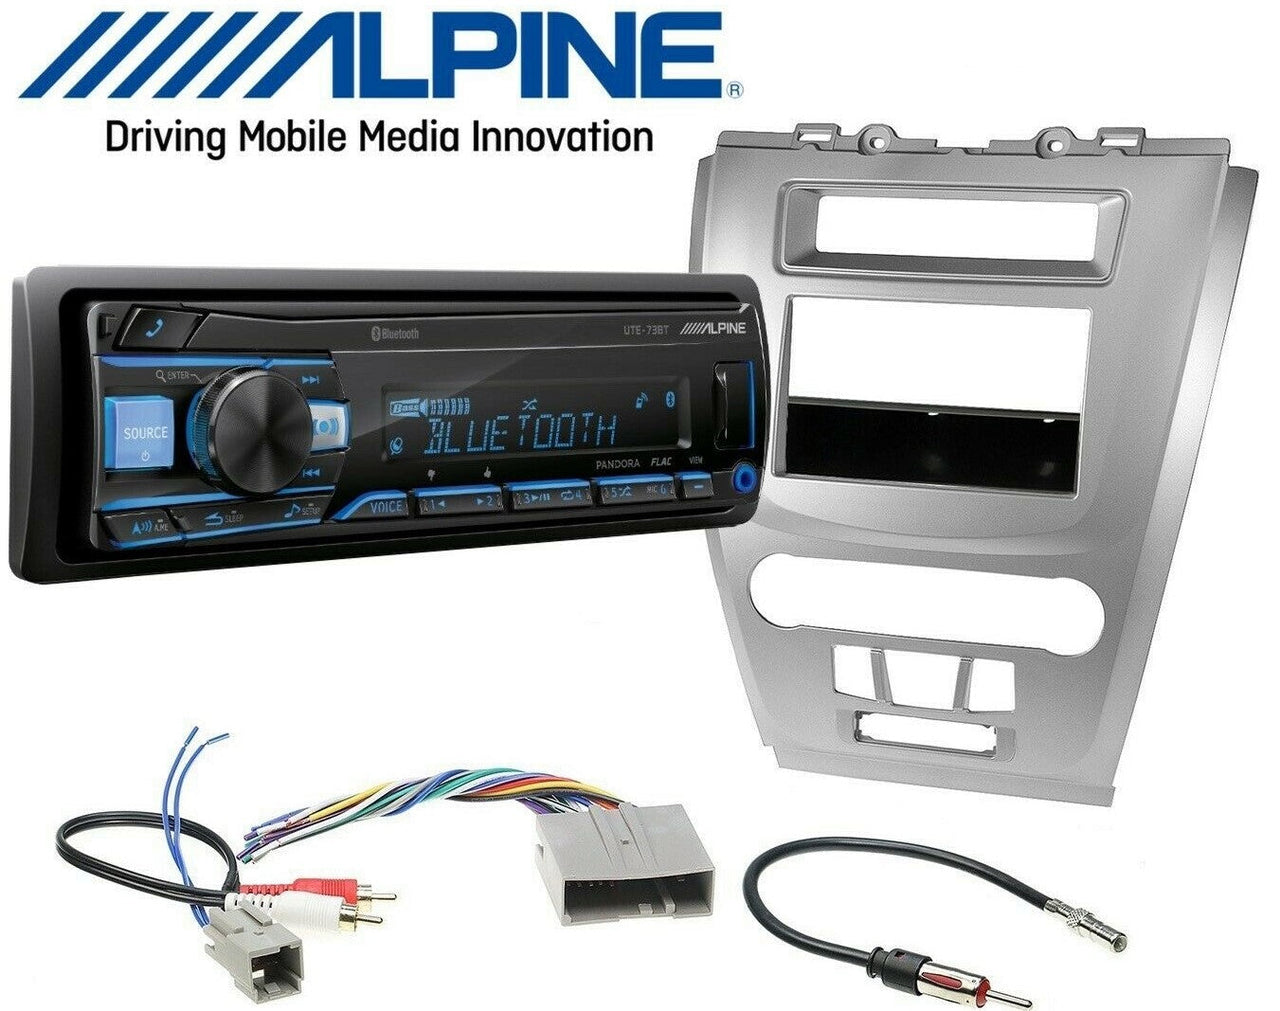 Alpine UTE-73BT, Single-DIN Digital Media Stereo w/ Bluetooth, USB & Auxiliary + Metra 99-5821S Single or Double DIN Dash Kit for Ford Fusion 2010-2012 - Silver